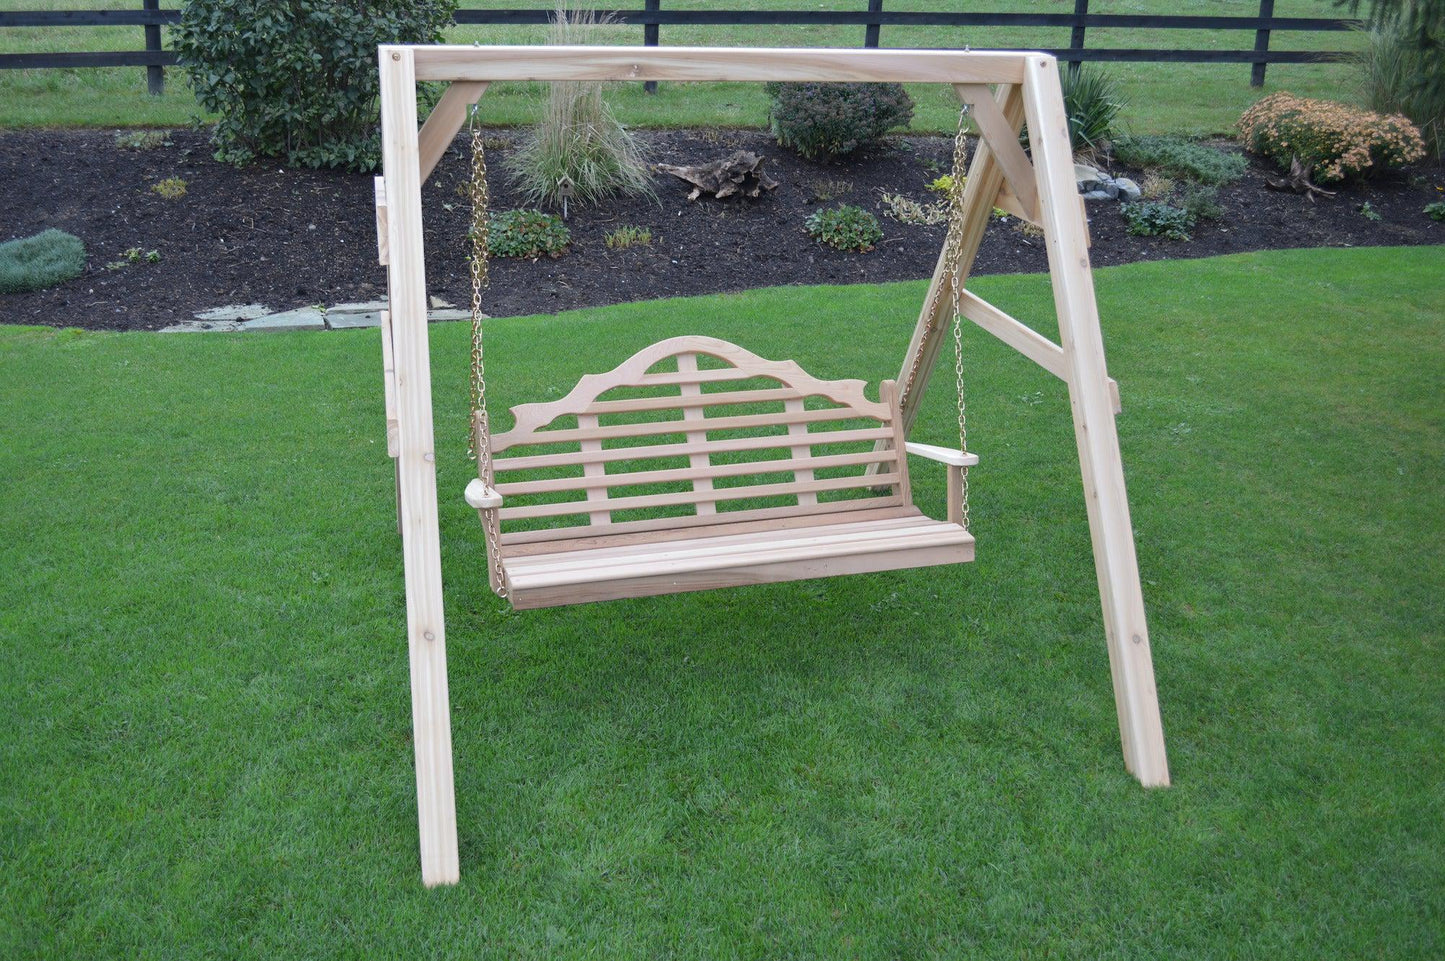 A&L FURNITURE CO. 5FT 4x4 A-Frame  Red Cedar Swing Stand for Swing or Swingbed Heavy Duty 1000 lbs Max Weight Capacity (Hangers Included) - LEAD TIME TO SHIP 2 WEEKS